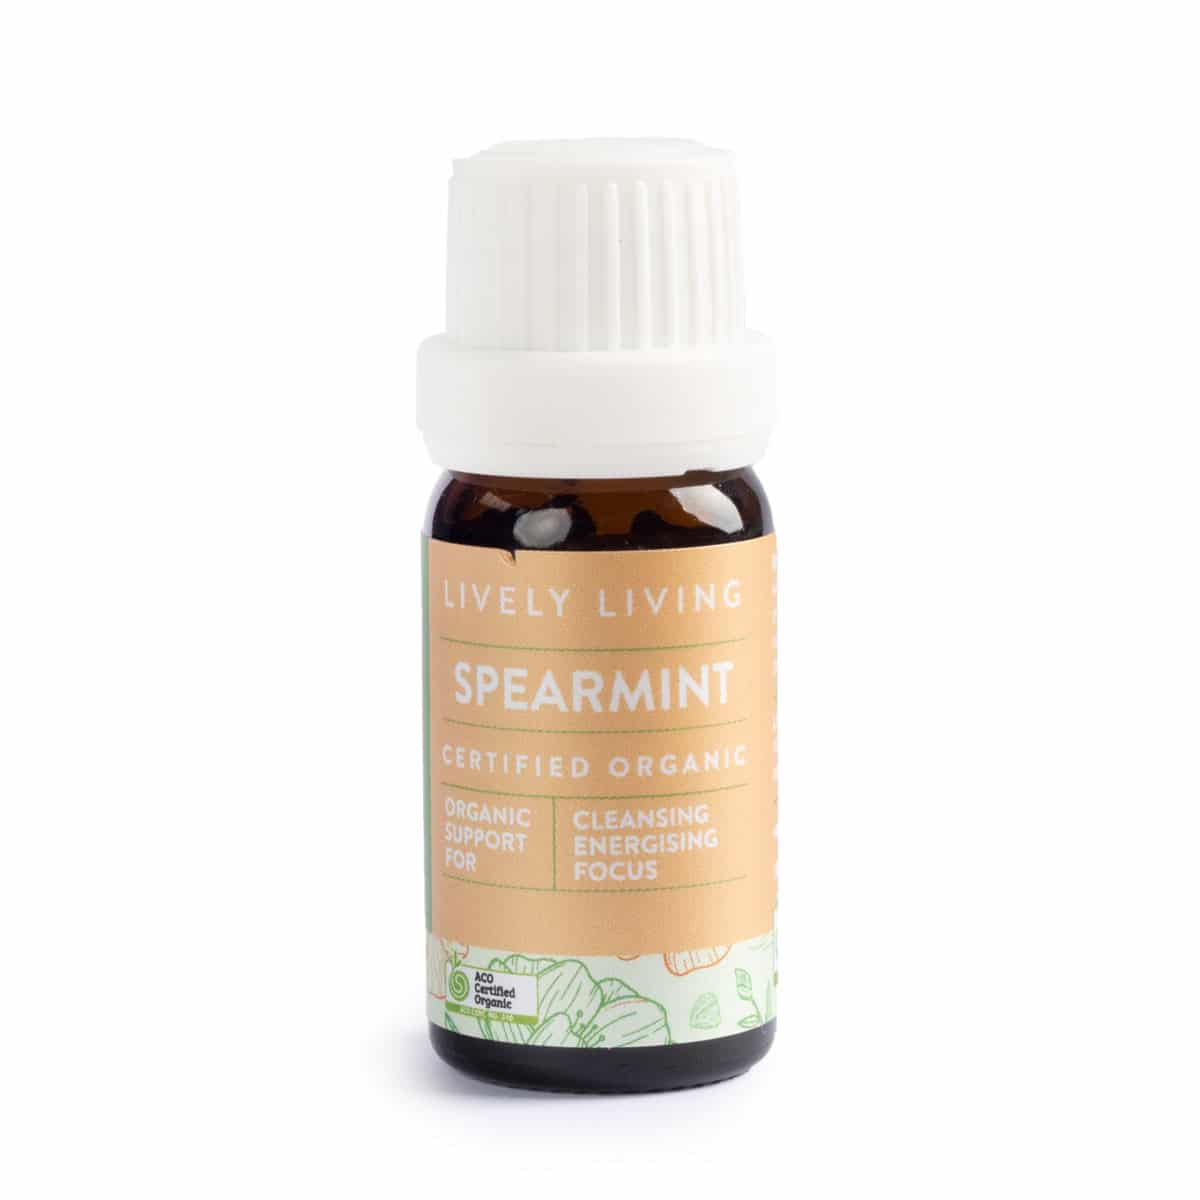 Lively Living spearmint pure essential oil